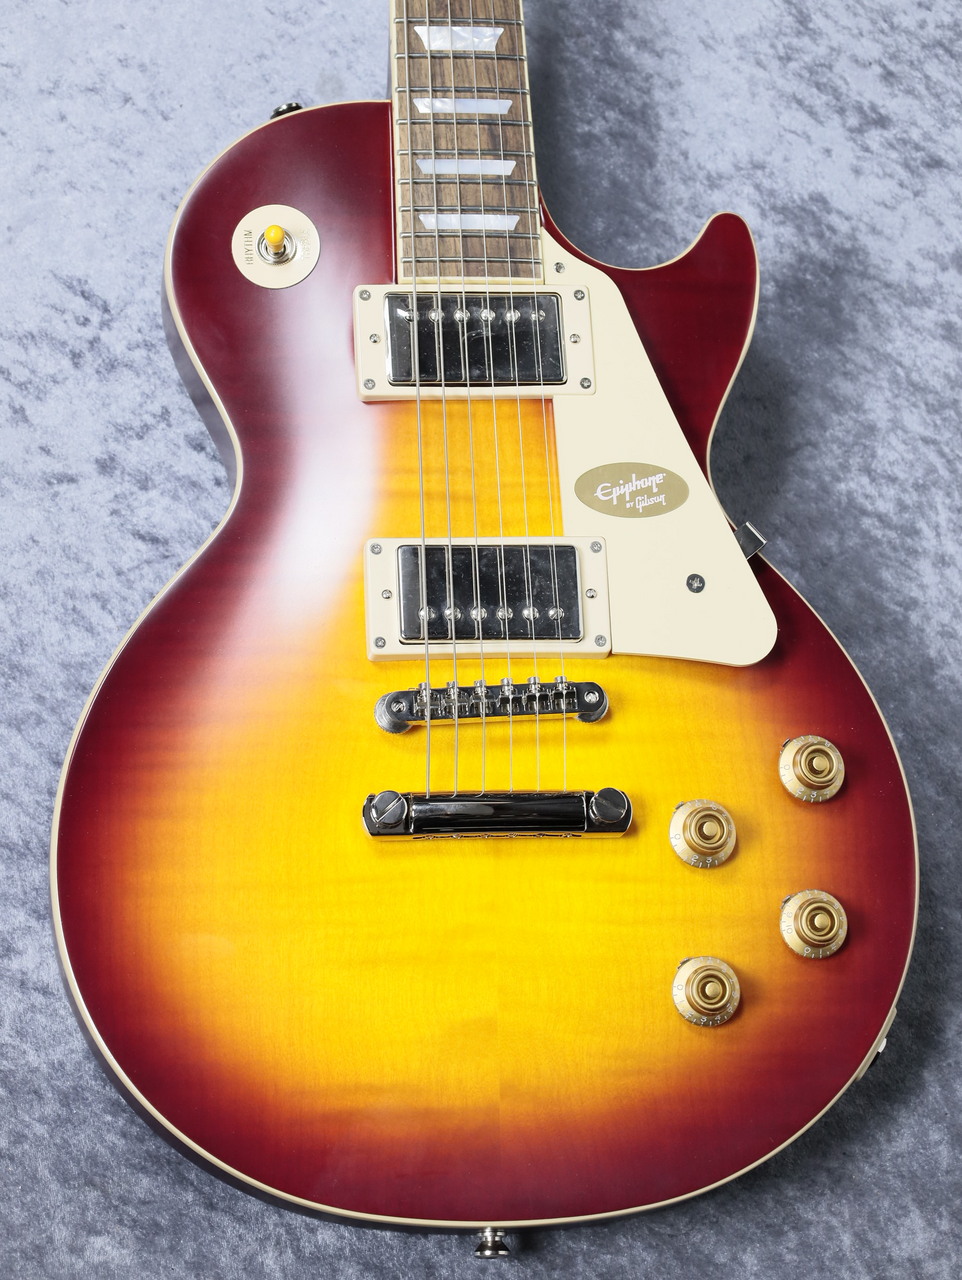 Epiphone 【予約開始!】Inspired by Gibson Custom shop 1959 Les Paul ...